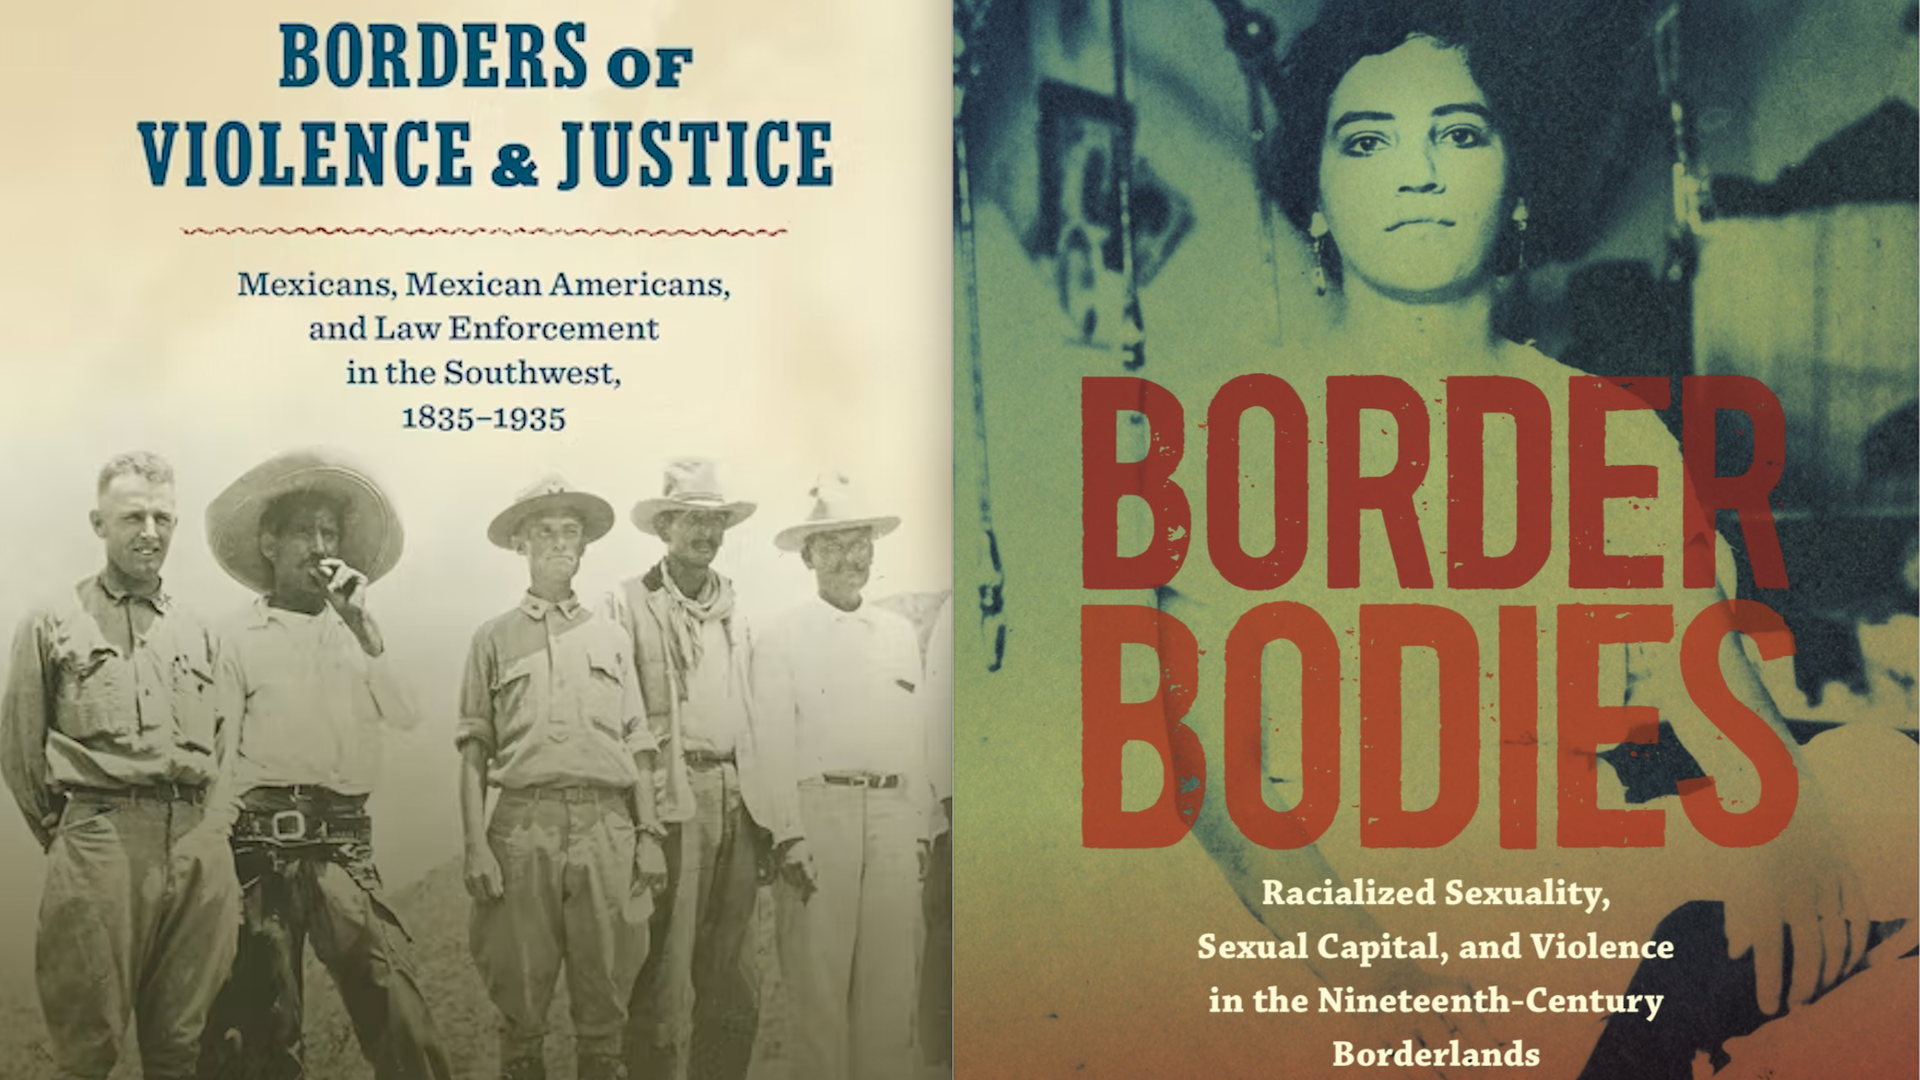 Book covers of "Borders of Violence and Justice" and "Border Bodies."